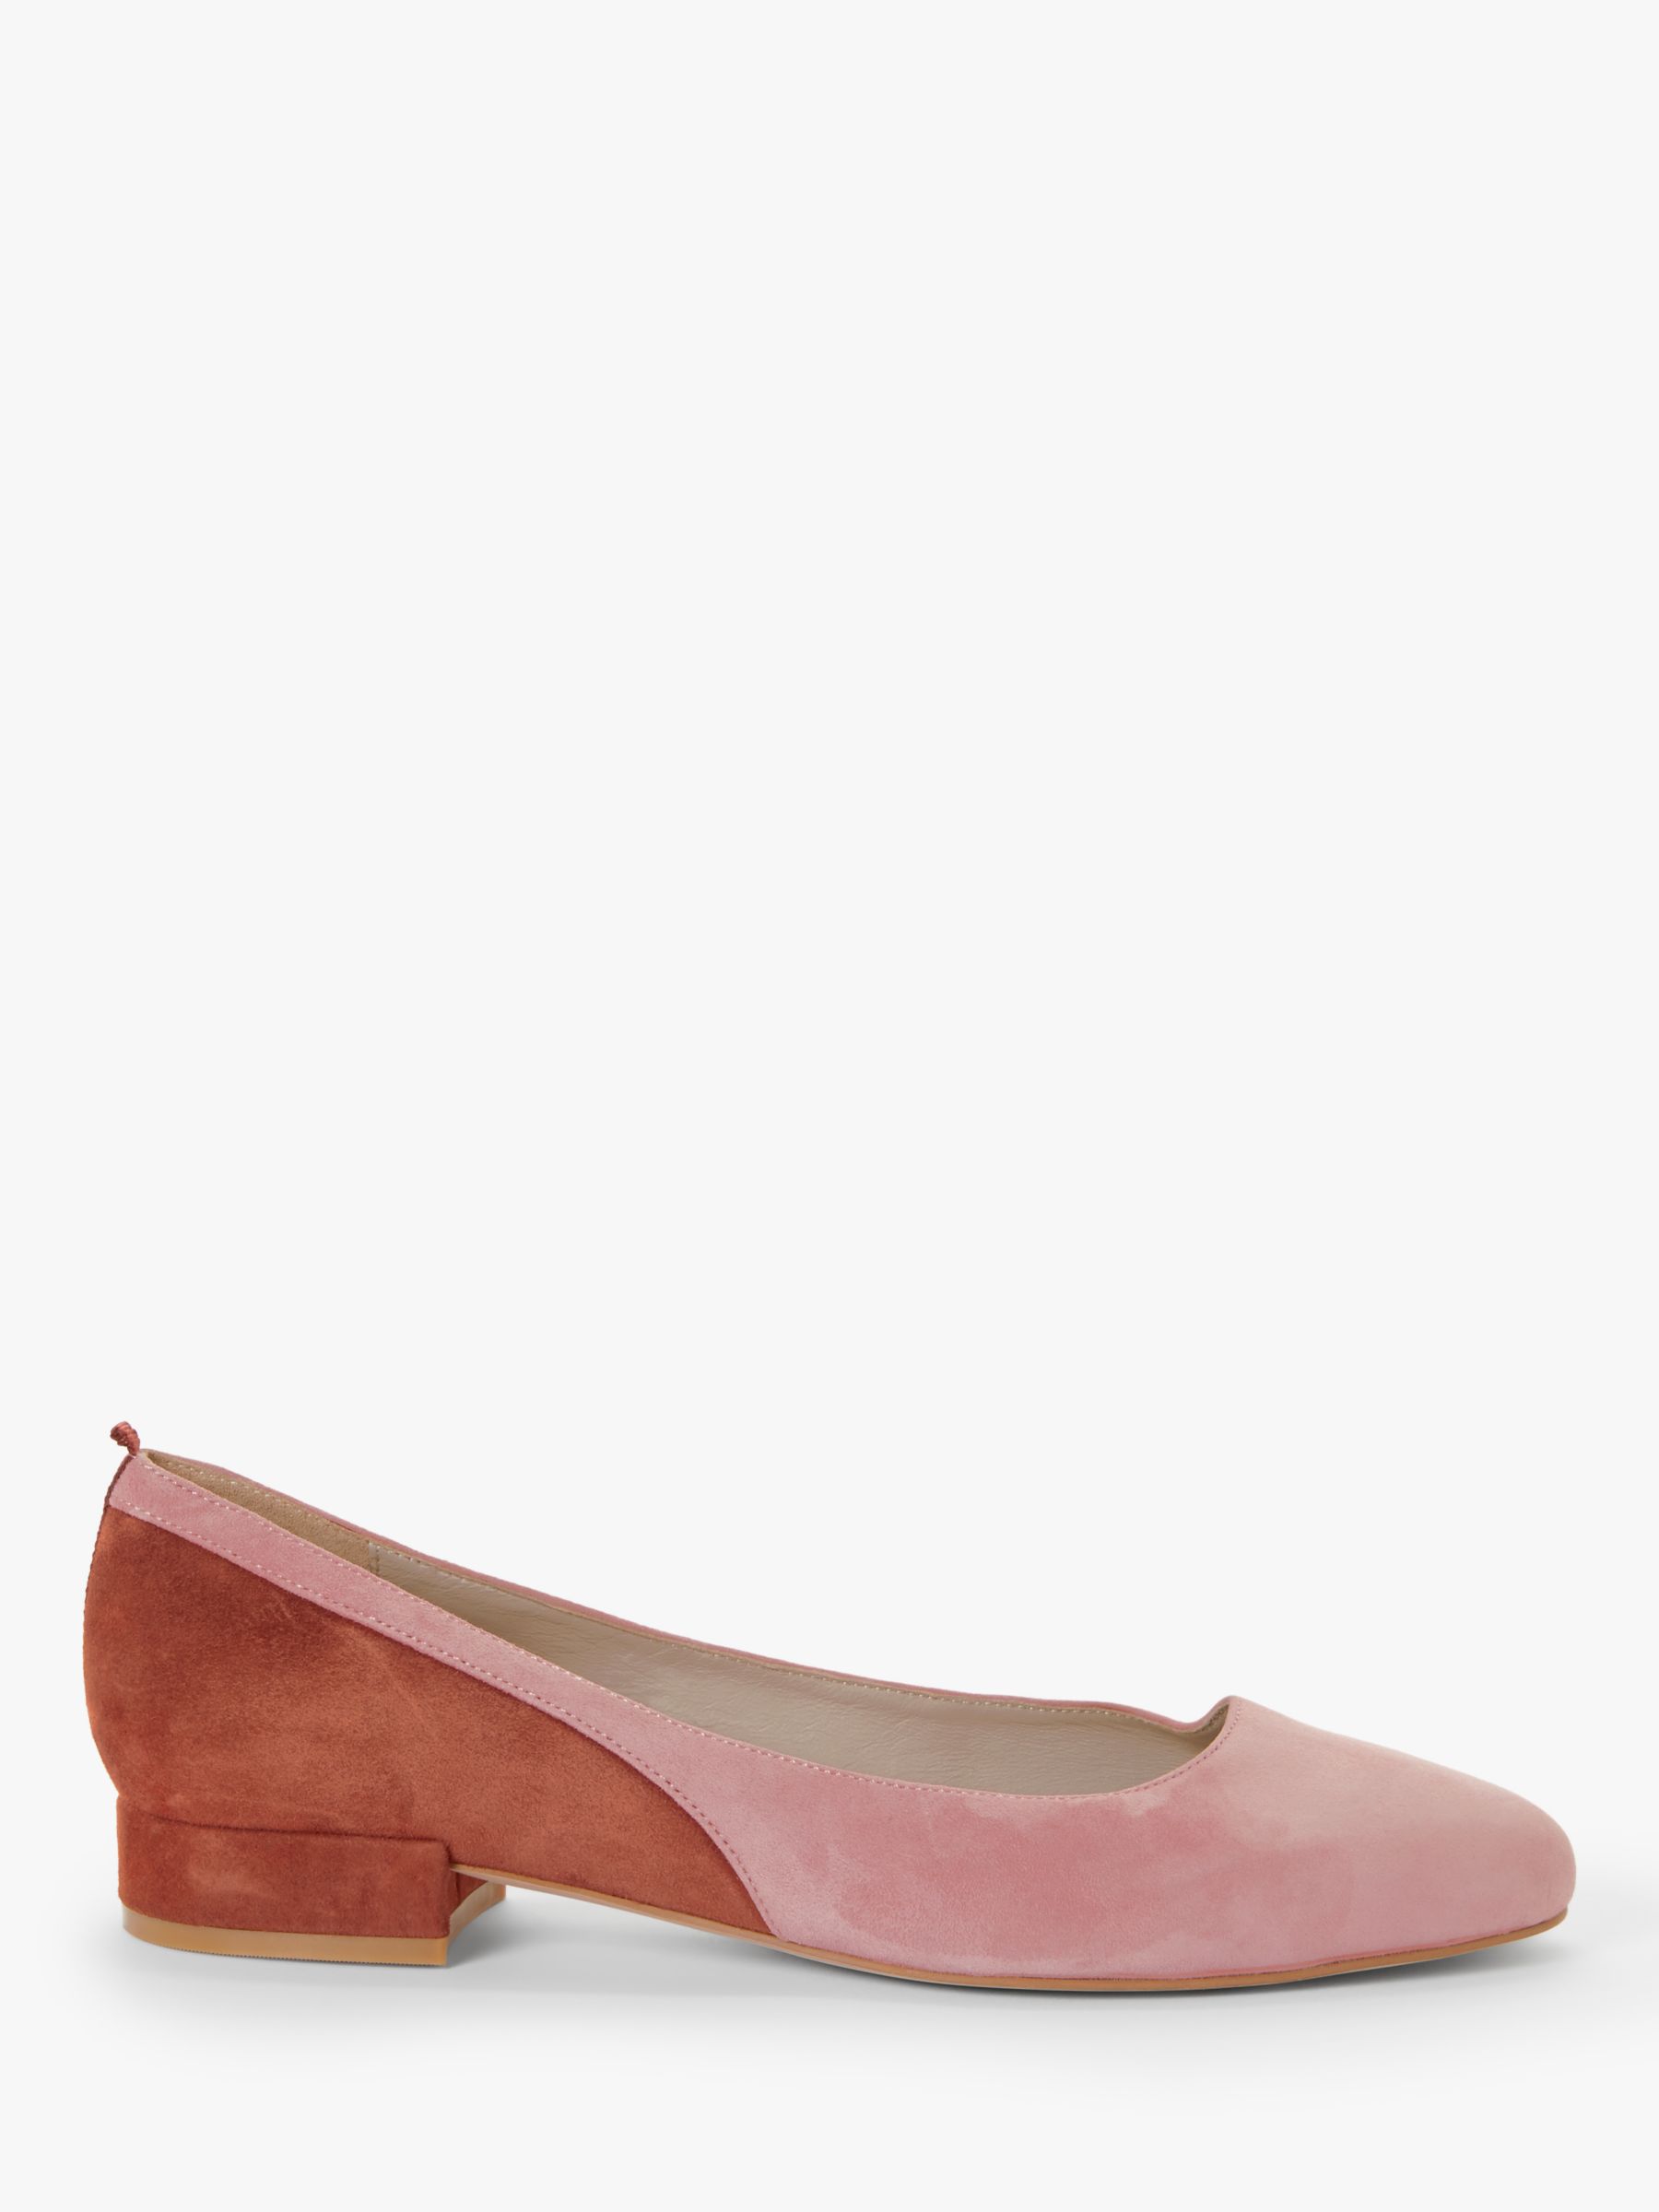 Boden Cathy Suede Low Colour Block Flats, Dusky Rose/Conker